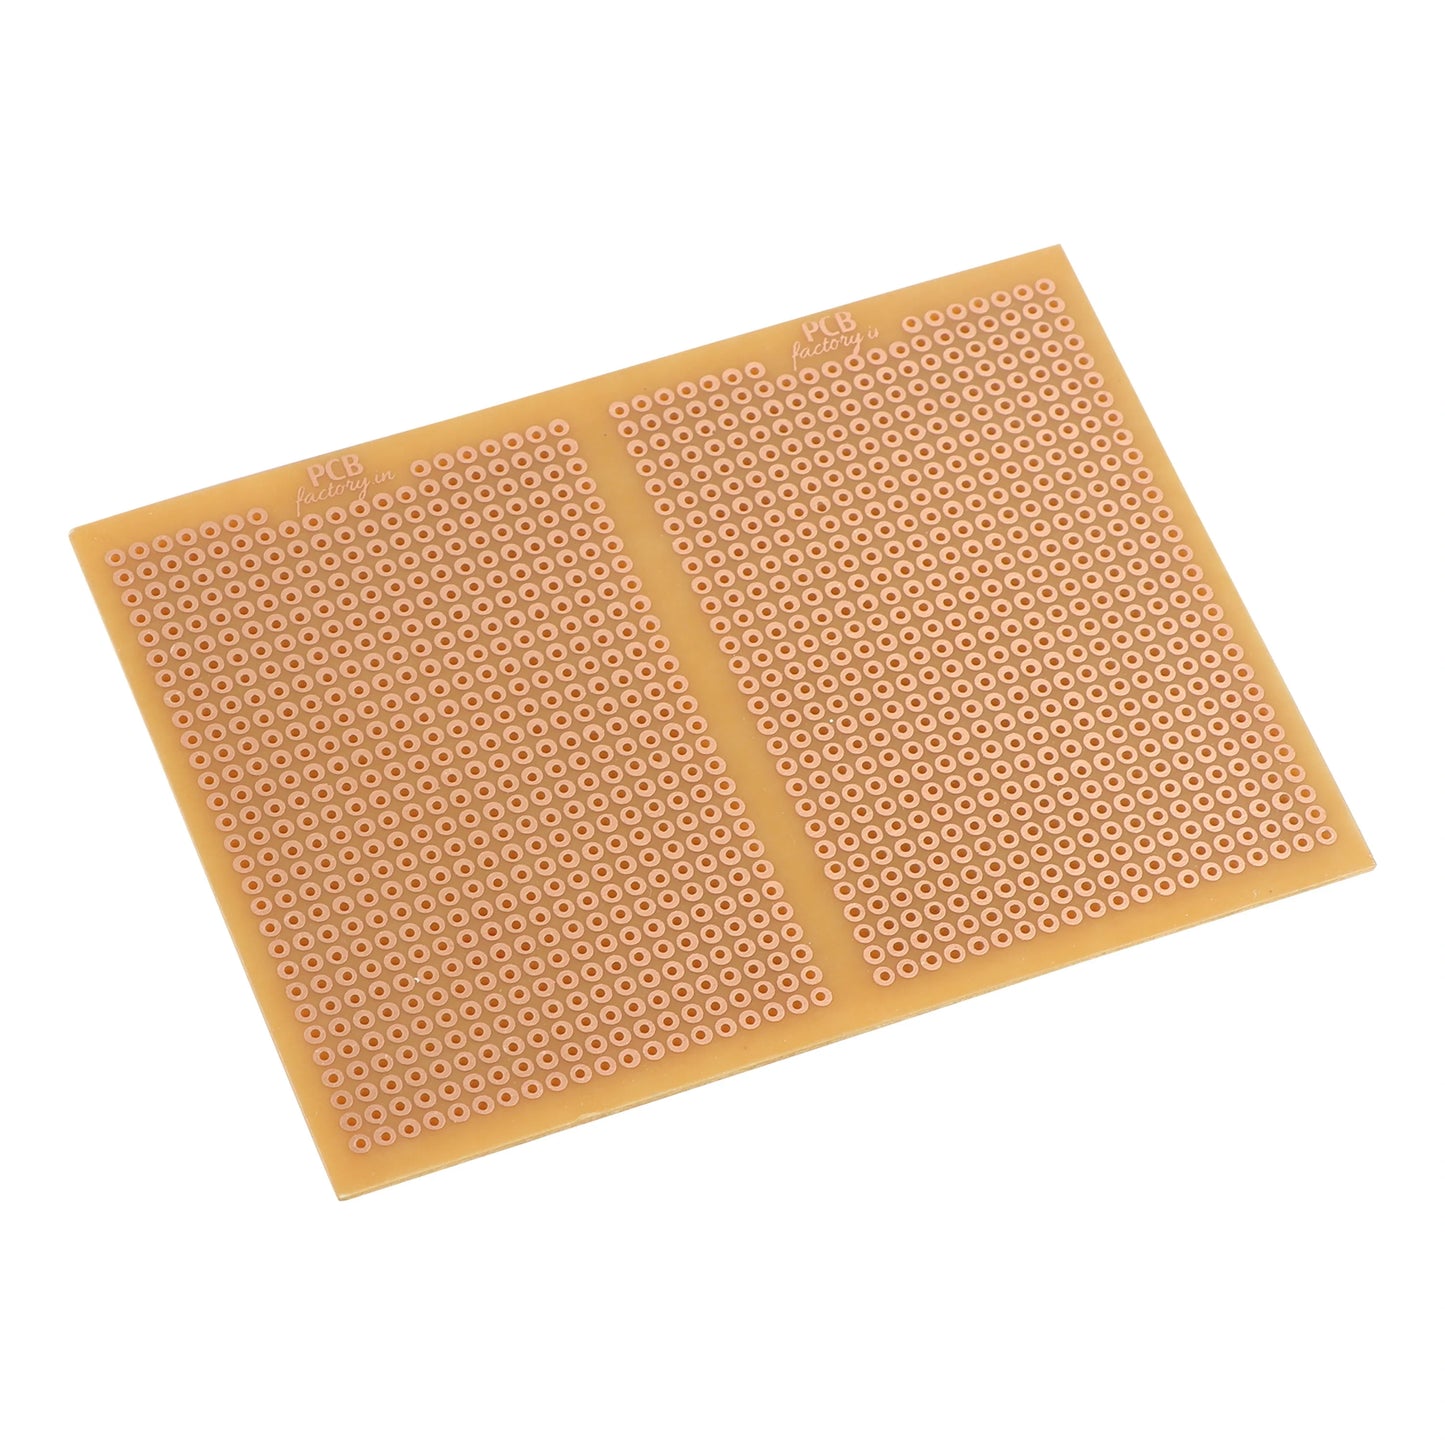 General Purpose PCB Breadboard - FR2 (Set of 10) 110mm x 80mm - with holes